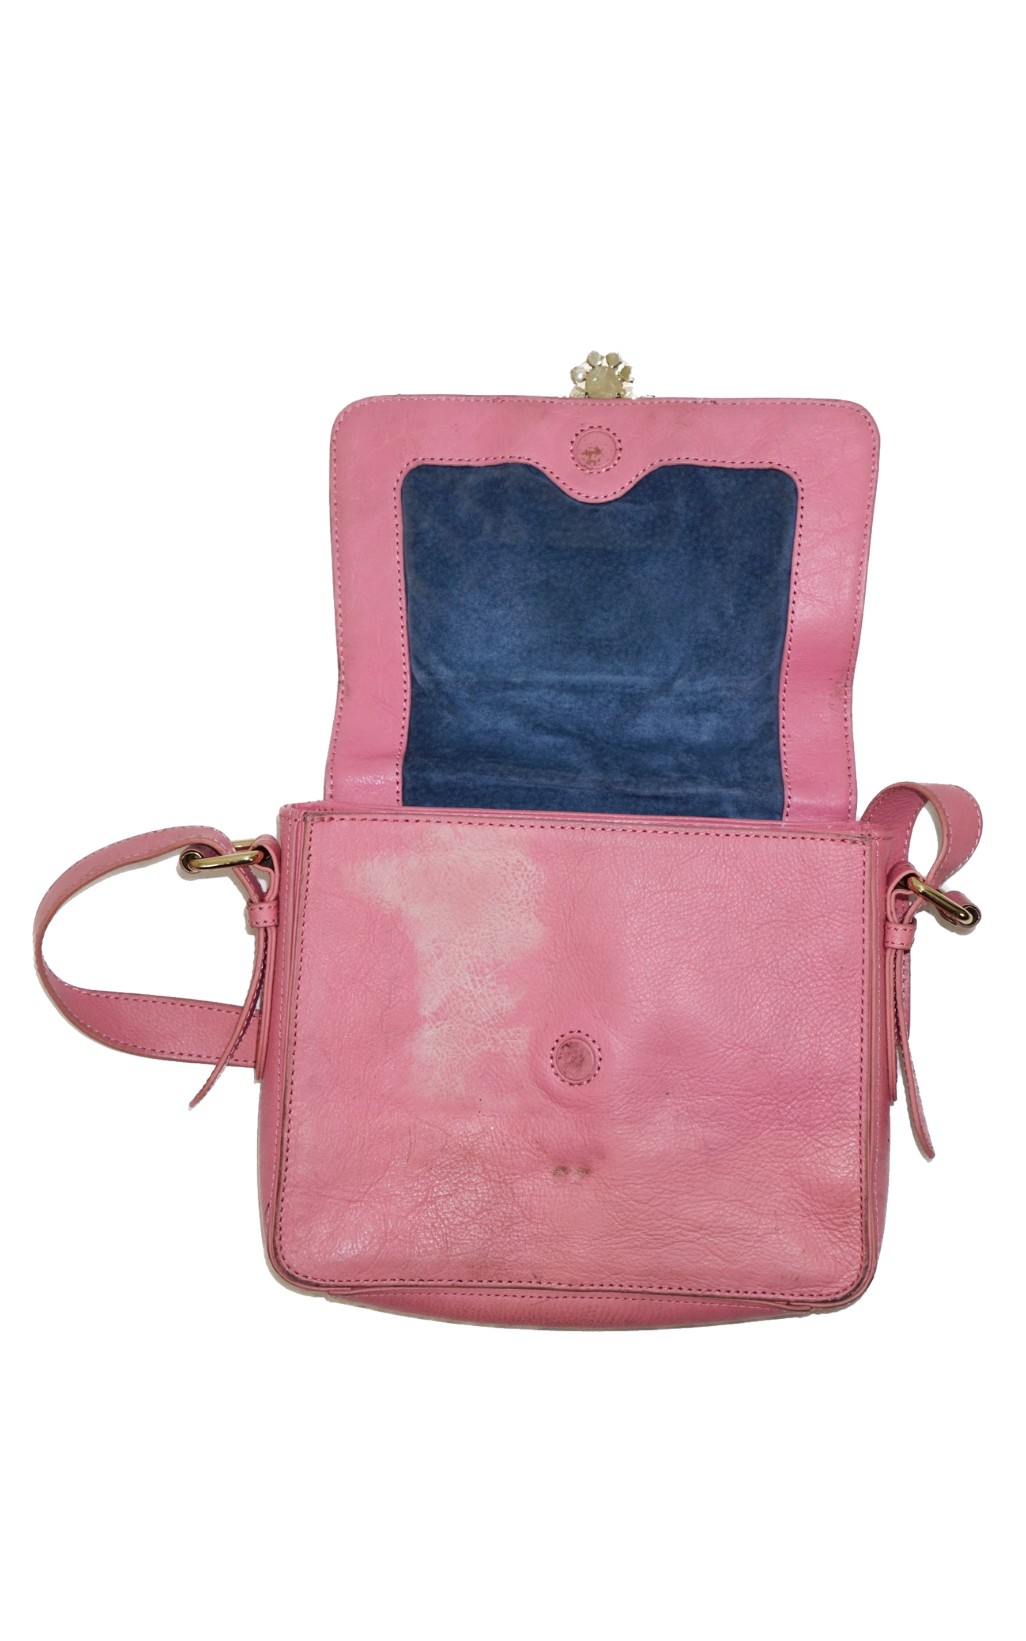 JUICY COUTURE Pink Leather Crystal Cross Bag resellum